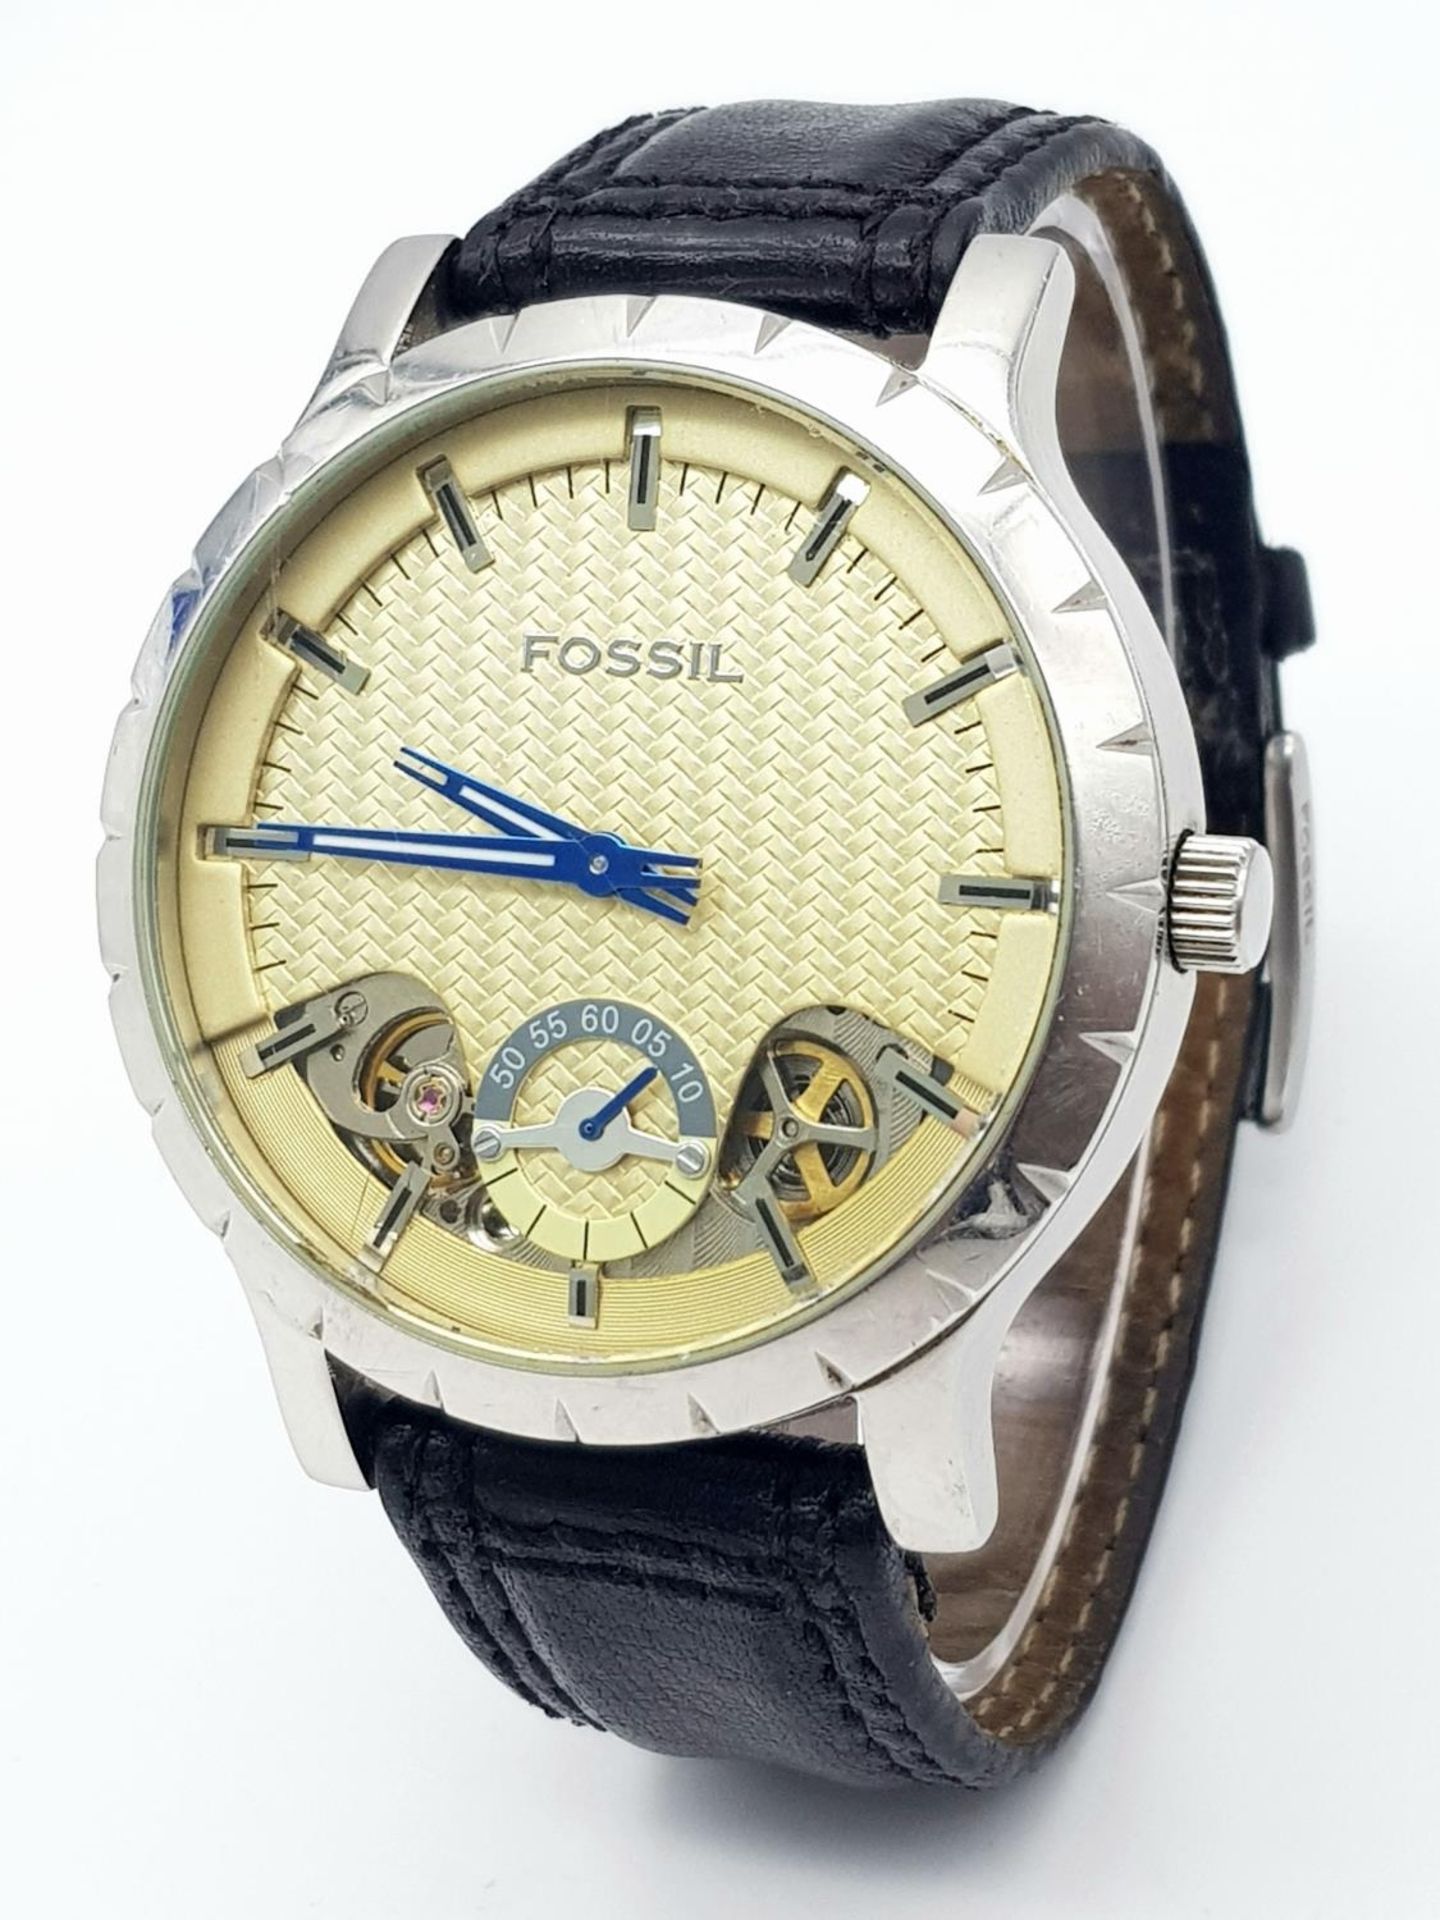 A Large Cased Fossil Automatic Gents Watch. Black leather strap. Stainless steel case - 48mm. Yellow